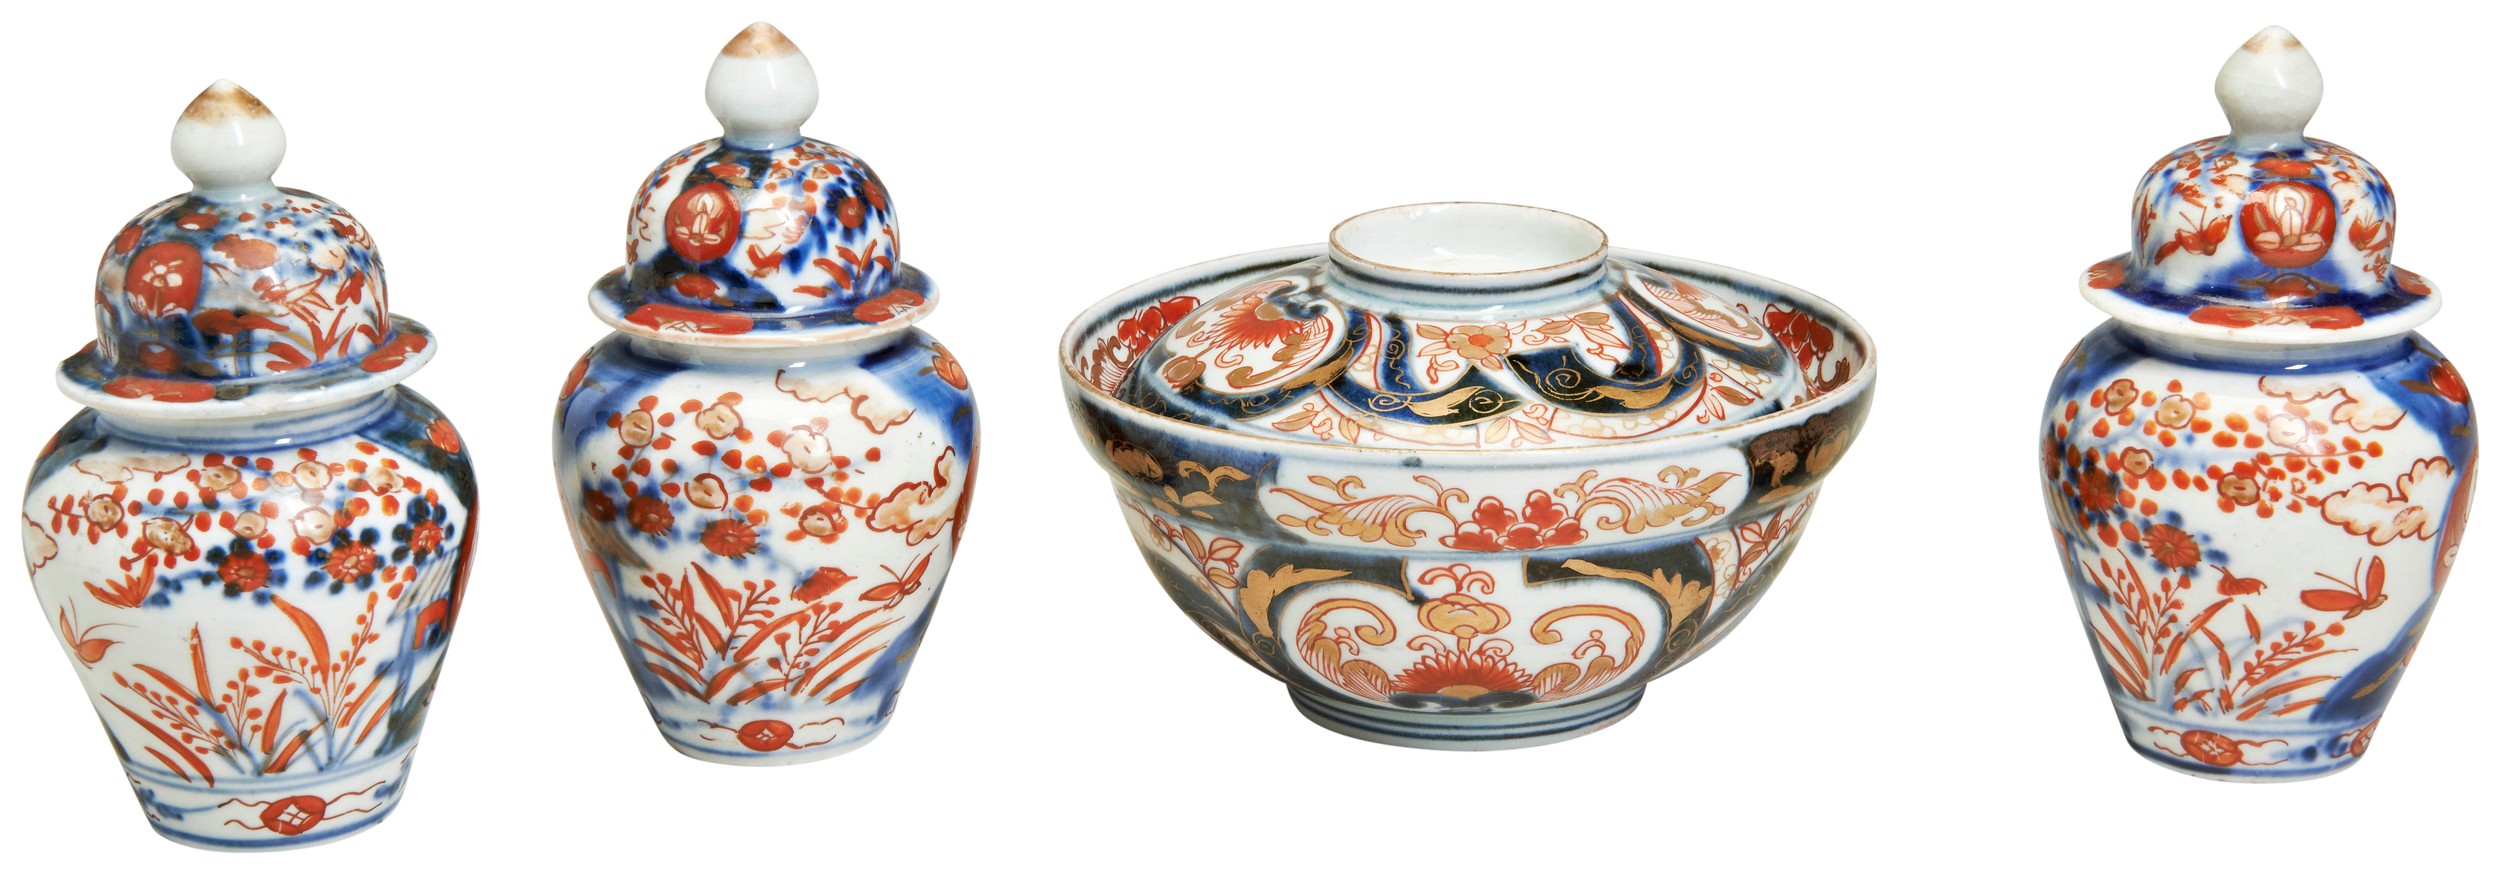 A GROUP OF JAPANESE IMARI WARES MEIJI PERIOD (1868-1912) comprising three covered jarlets, a bowl